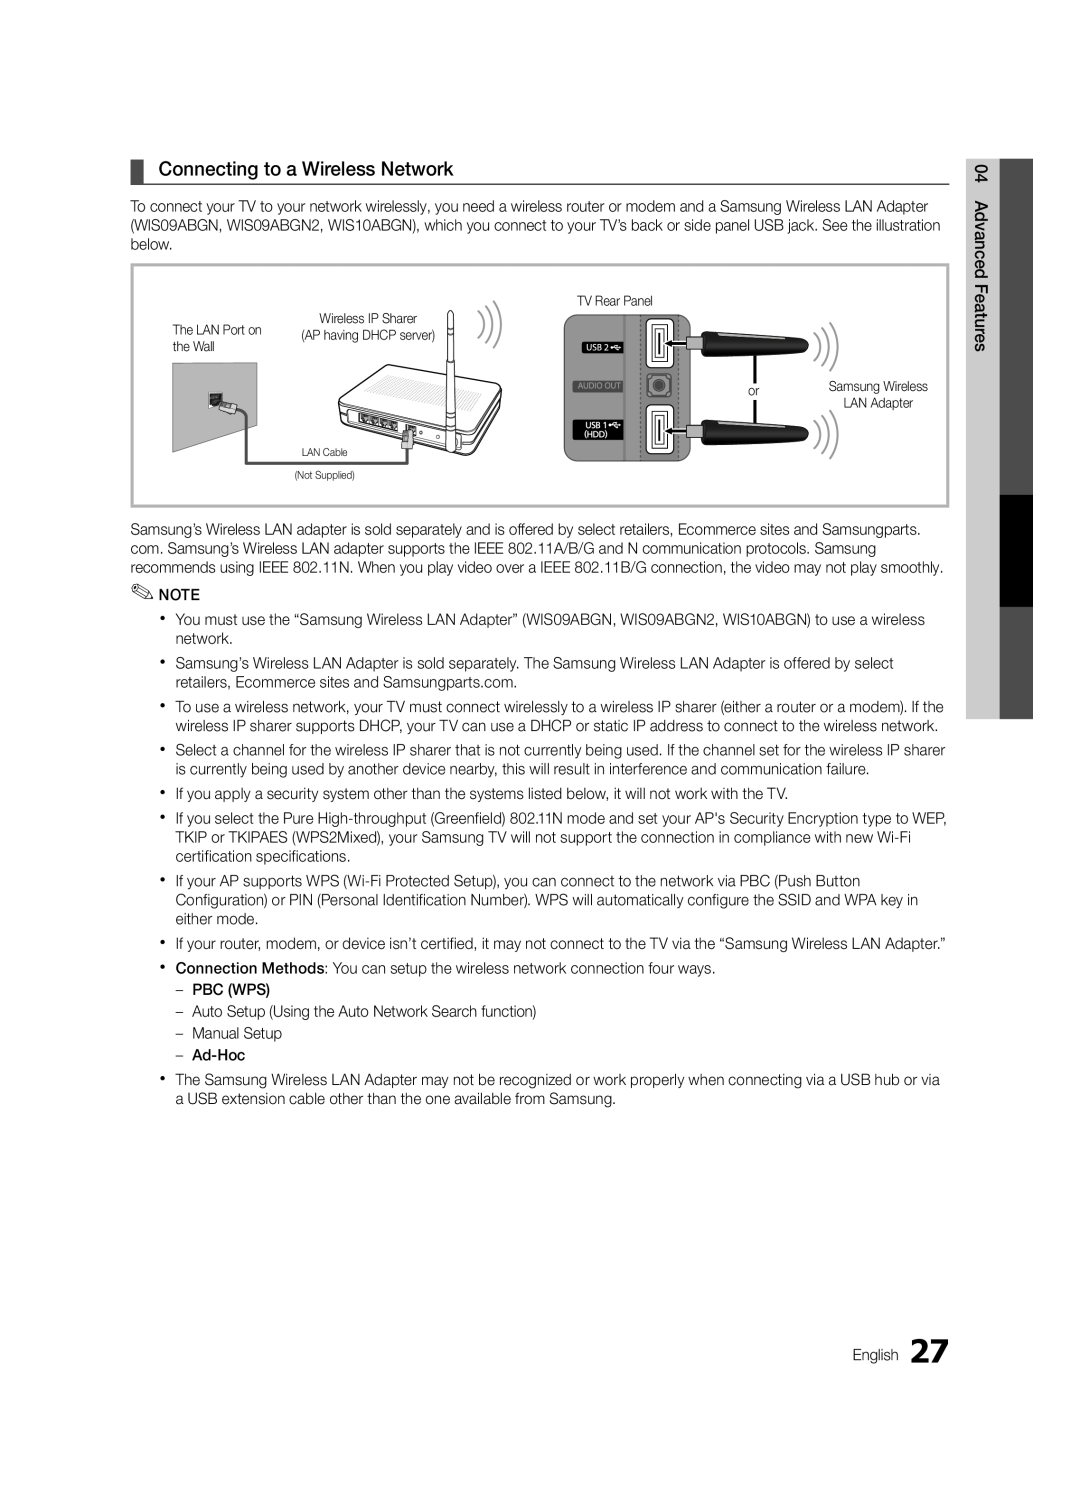 Samsung UC6300-ZC, BN68-03165B-01 user manual Connecting to a Wireless Network, 04Features, Samsung Wireless, LAN Adapter 